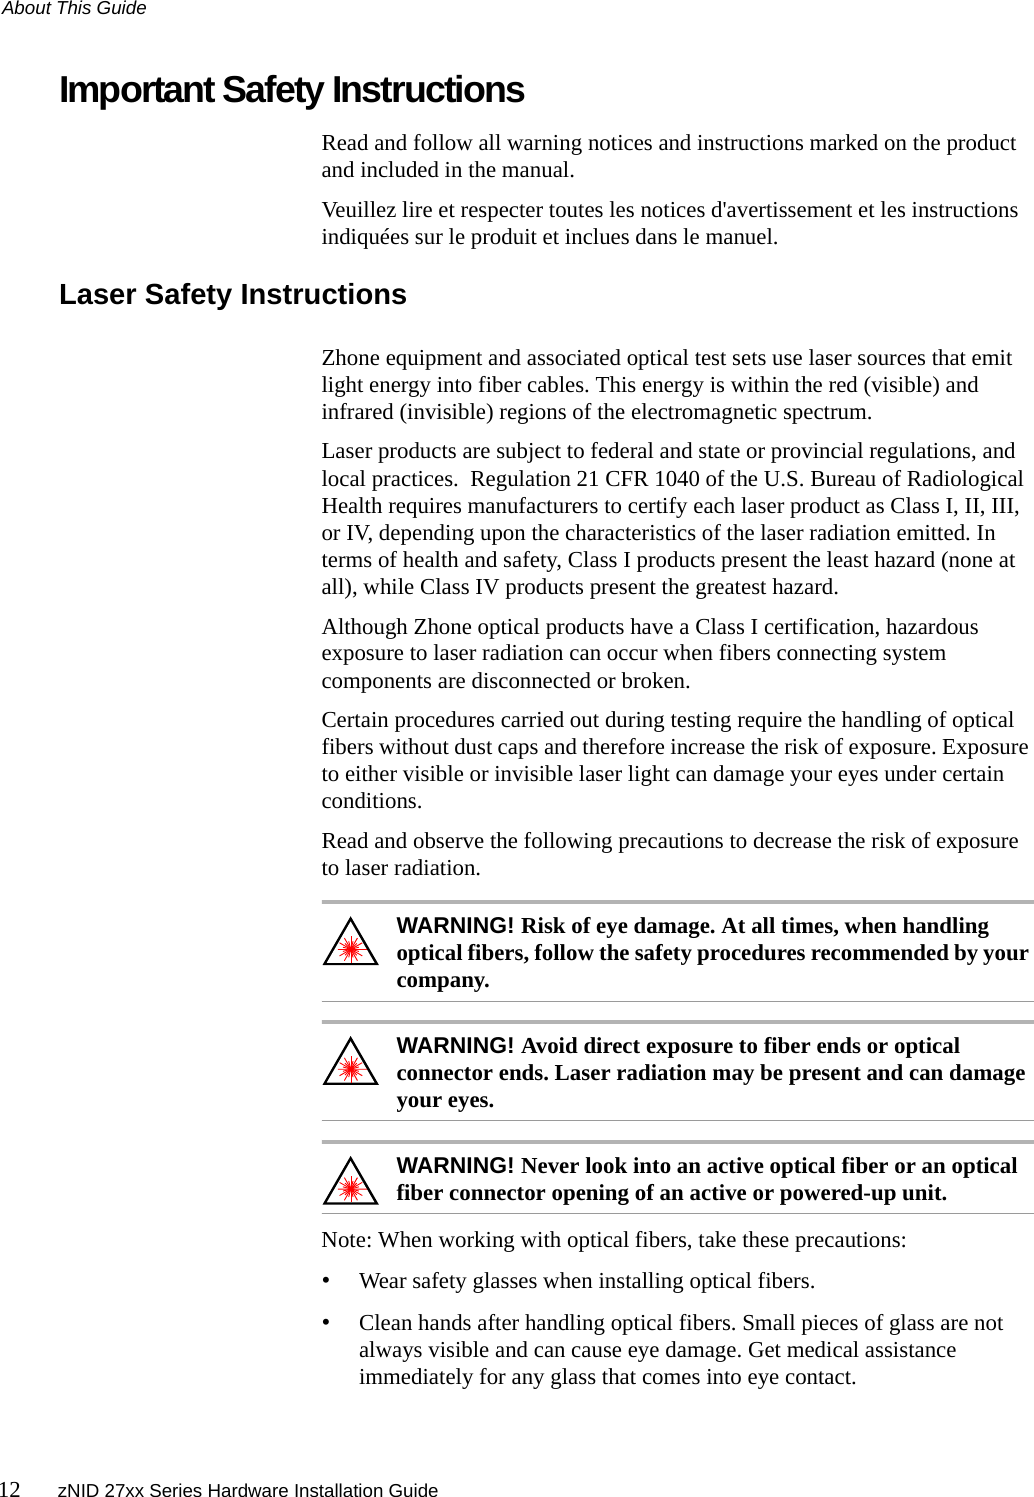 About This Guide12 zNID 27xx Series Hardware Installation GuideImportant Safety InstructionsRead and follow all warning notices and instructions marked on the product and included in the manual.Veuillez lire et respecter toutes les notices d&apos;avertissement et les instructions indiquées sur le produit et inclues dans le manuel.Laser Safety InstructionsZhone equipment and associated optical test sets use laser sources that emit light energy into fiber cables. This energy is within the red (visible) and infrared (invisible) regions of the electromagnetic spectrum.Laser products are subject to federal and state or provincial regulations, and local practices.  Regulation 21 CFR 1040 of the U.S. Bureau of Radiological Health requires manufacturers to certify each laser product as Class I, II, III, or IV, depending upon the characteristics of the laser radiation emitted. In terms of health and safety, Class I products present the least hazard (none at all), while Class IV products present the greatest hazard.Although Zhone optical products have a Class I certification, hazardous exposure to laser radiation can occur when fibers connecting system components are disconnected or broken.Certain procedures carried out during testing require the handling of optical fibers without dust caps and therefore increase the risk of exposure. Exposure to either visible or invisible laser light can damage your eyes under certain conditions.Read and observe the following precautions to decrease the risk of exposure to laser radiation.WARNING! Risk of eye damage. At all times, when handling optical fibers, follow the safety procedures recommended by your company.WARNING! Avoid direct exposure to fiber ends or optical connector ends. Laser radiation may be present and can damage your eyes.WARNING! Never look into an active optical fiber or an optical fiber connector opening of an active or powered-up unit.Note: When working with optical fibers, take these precautions:•Wear safety glasses when installing optical fibers.•Clean hands after handling optical fibers. Small pieces of glass are not always visible and can cause eye damage. Get medical assistance immediately for any glass that comes into eye contact.